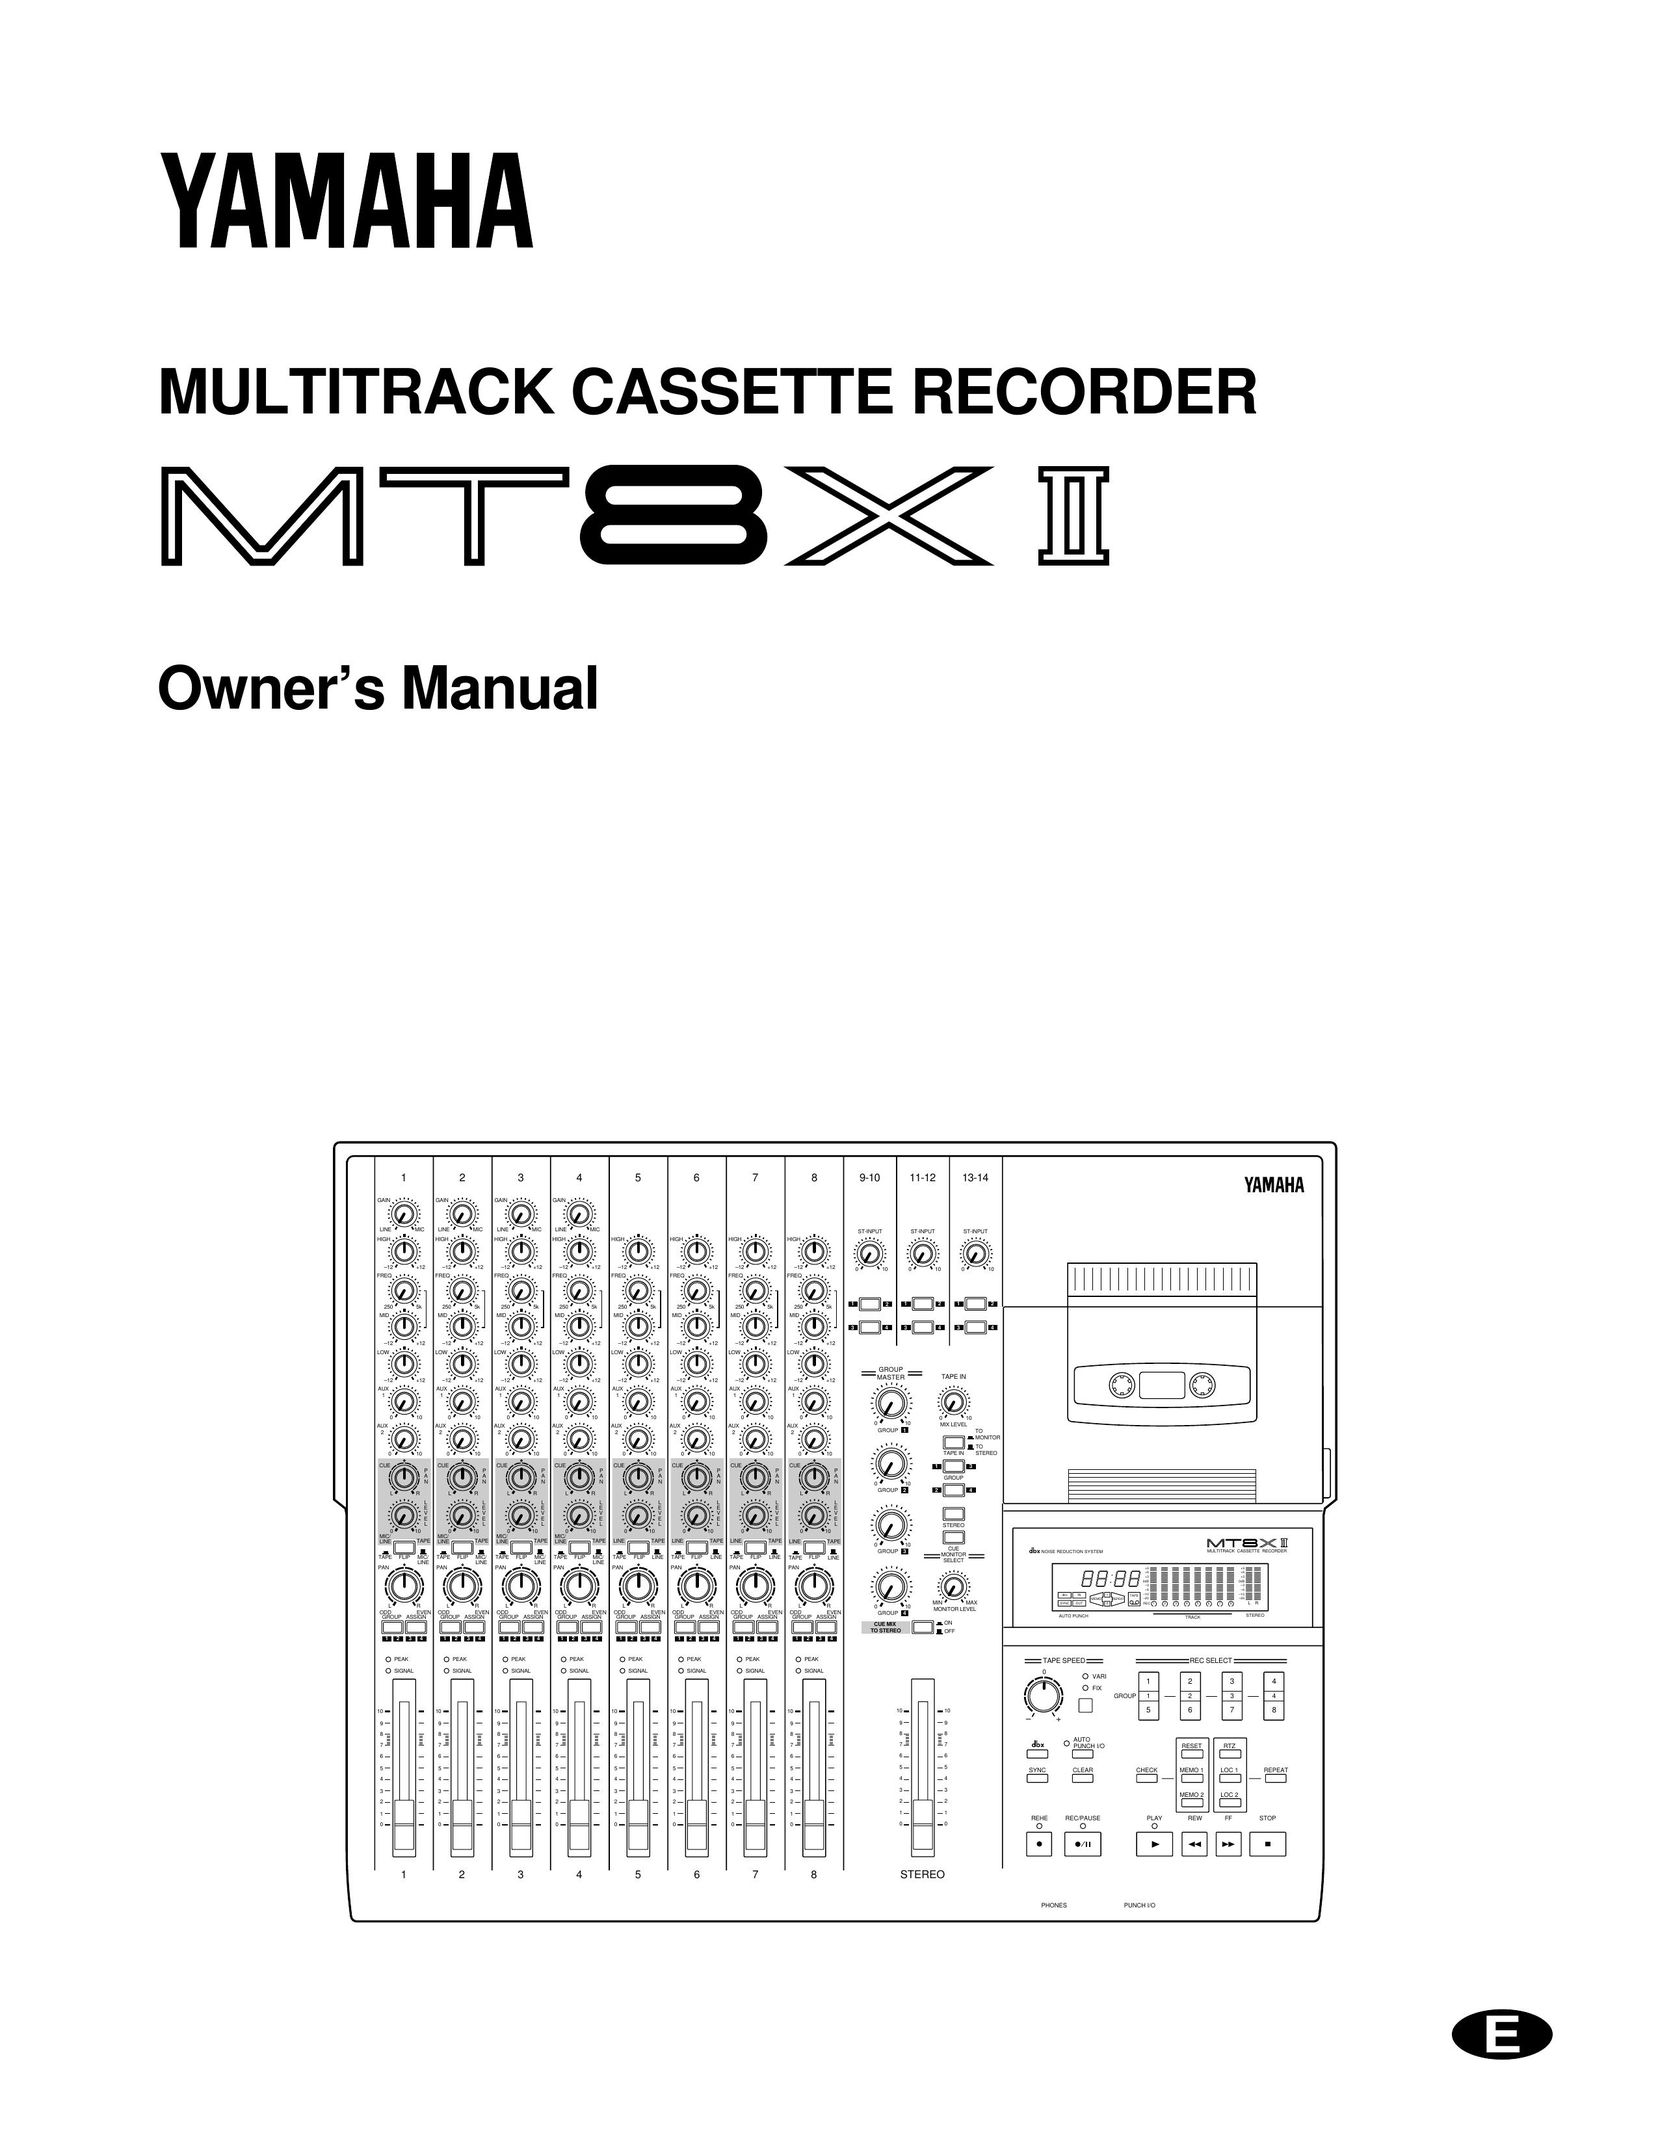 Yamaha MT8XII Microcassette Recorder User Manual